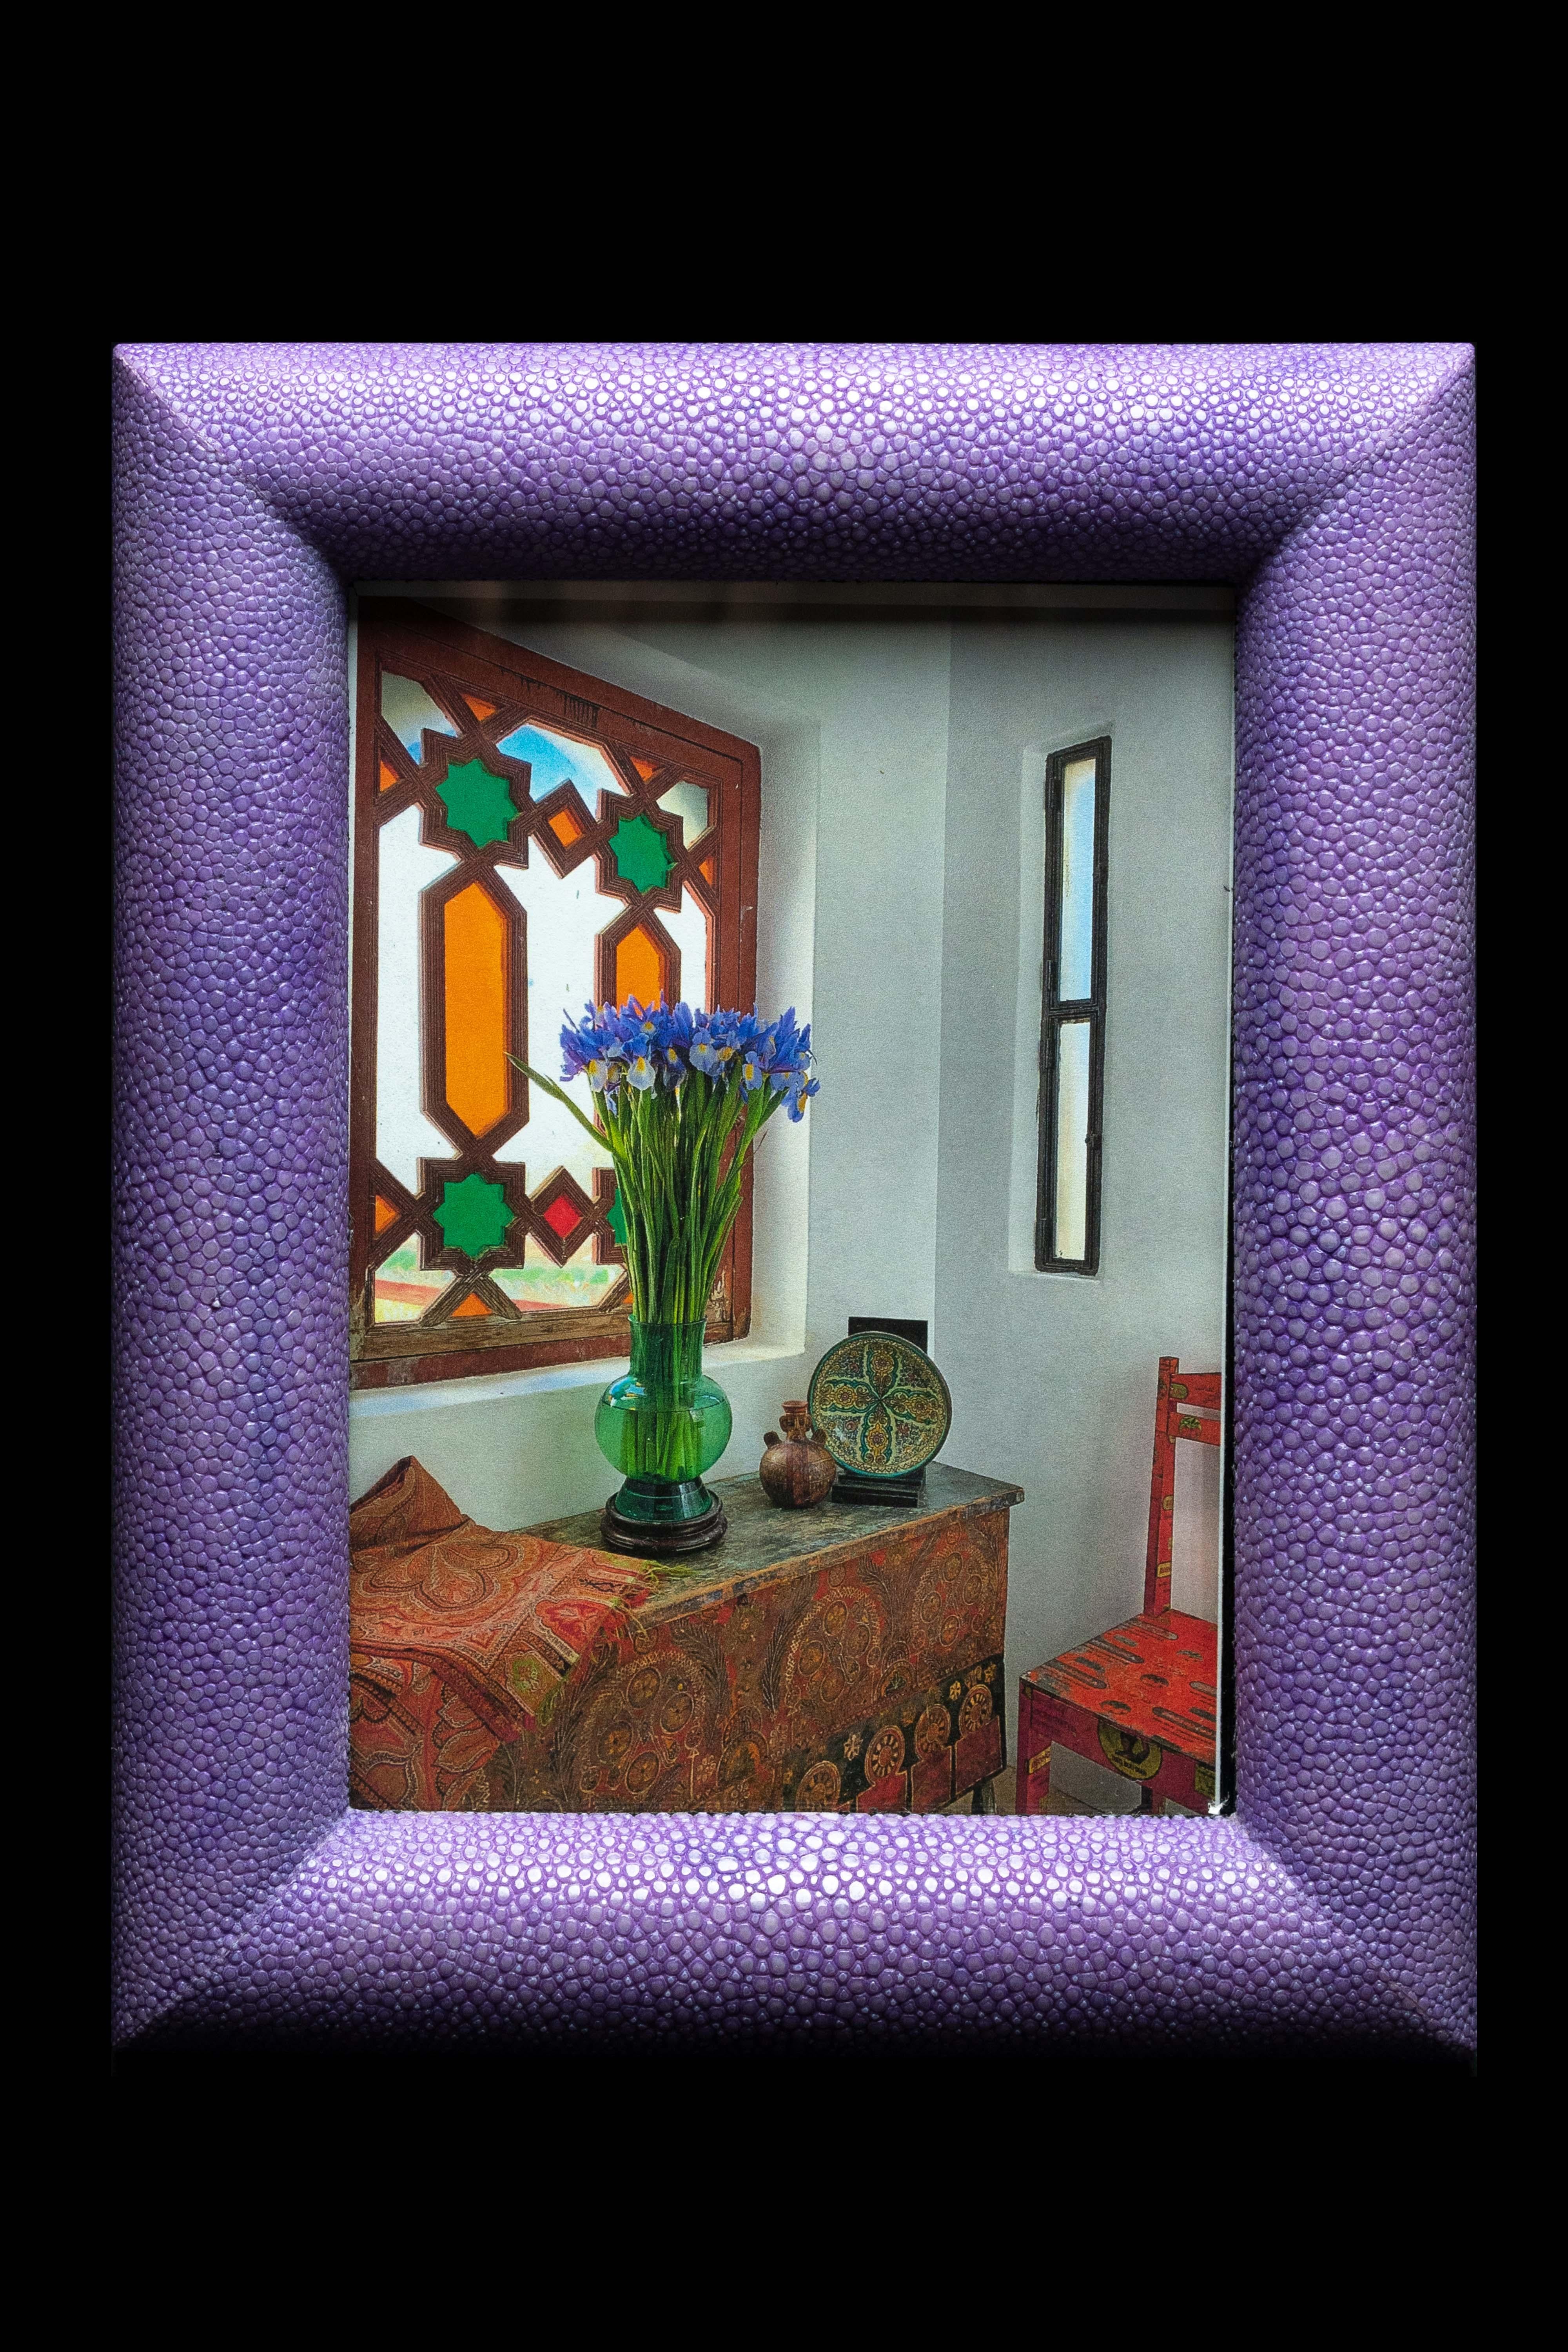 Purple shagreen frame

Measures approximately: 9